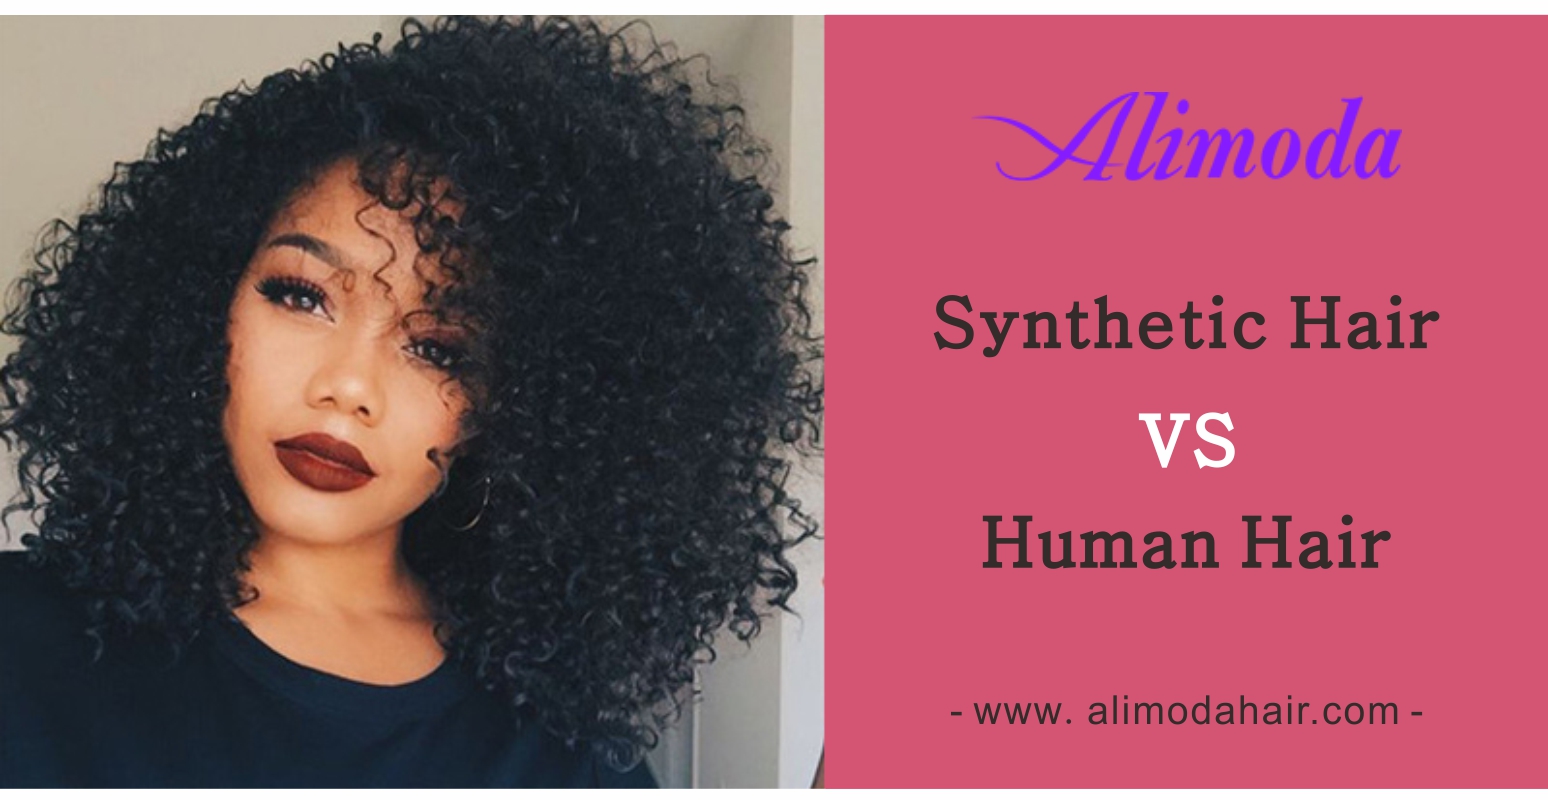 What are synthetic hair and human hair and how to distinguish